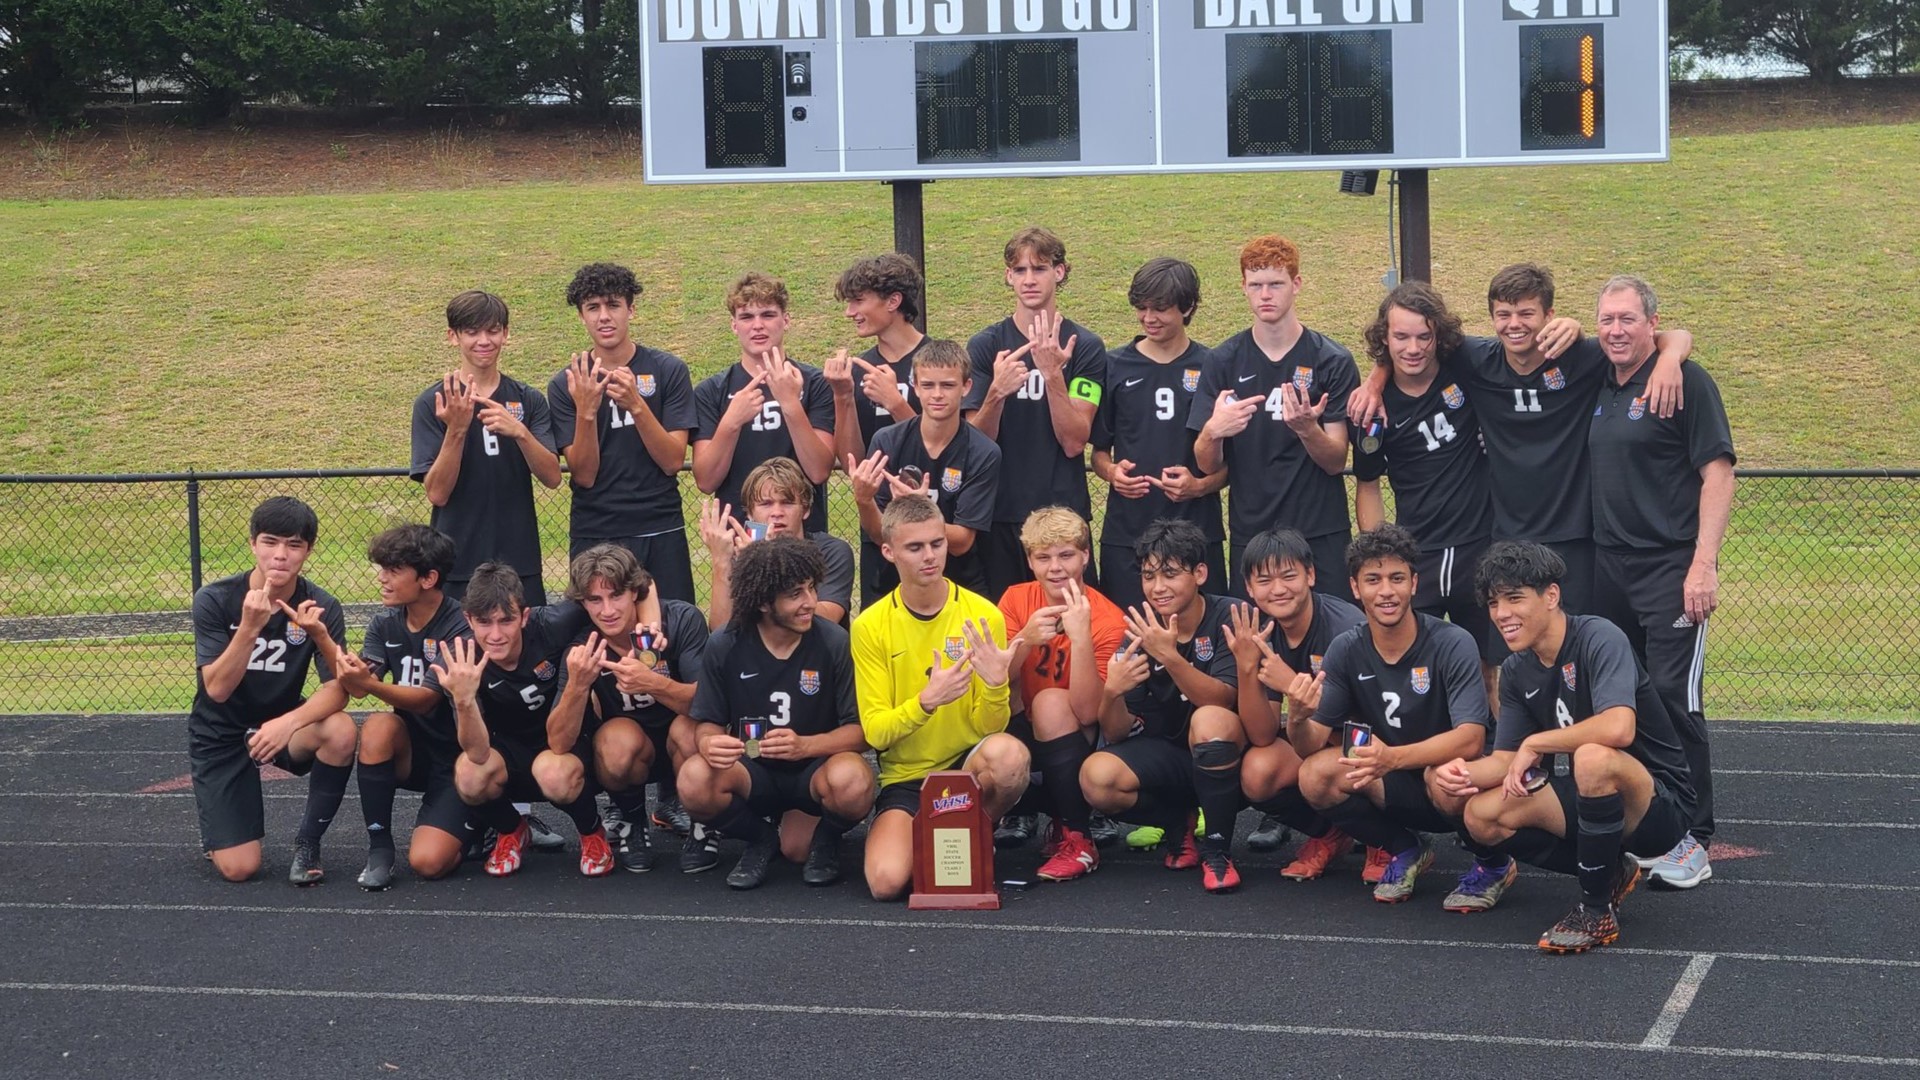 Michael Hackworth of Tabb High School got the only goal the Tigers needed as they beat Meridian 1-0. They bring home the program's first championship in 25 years.